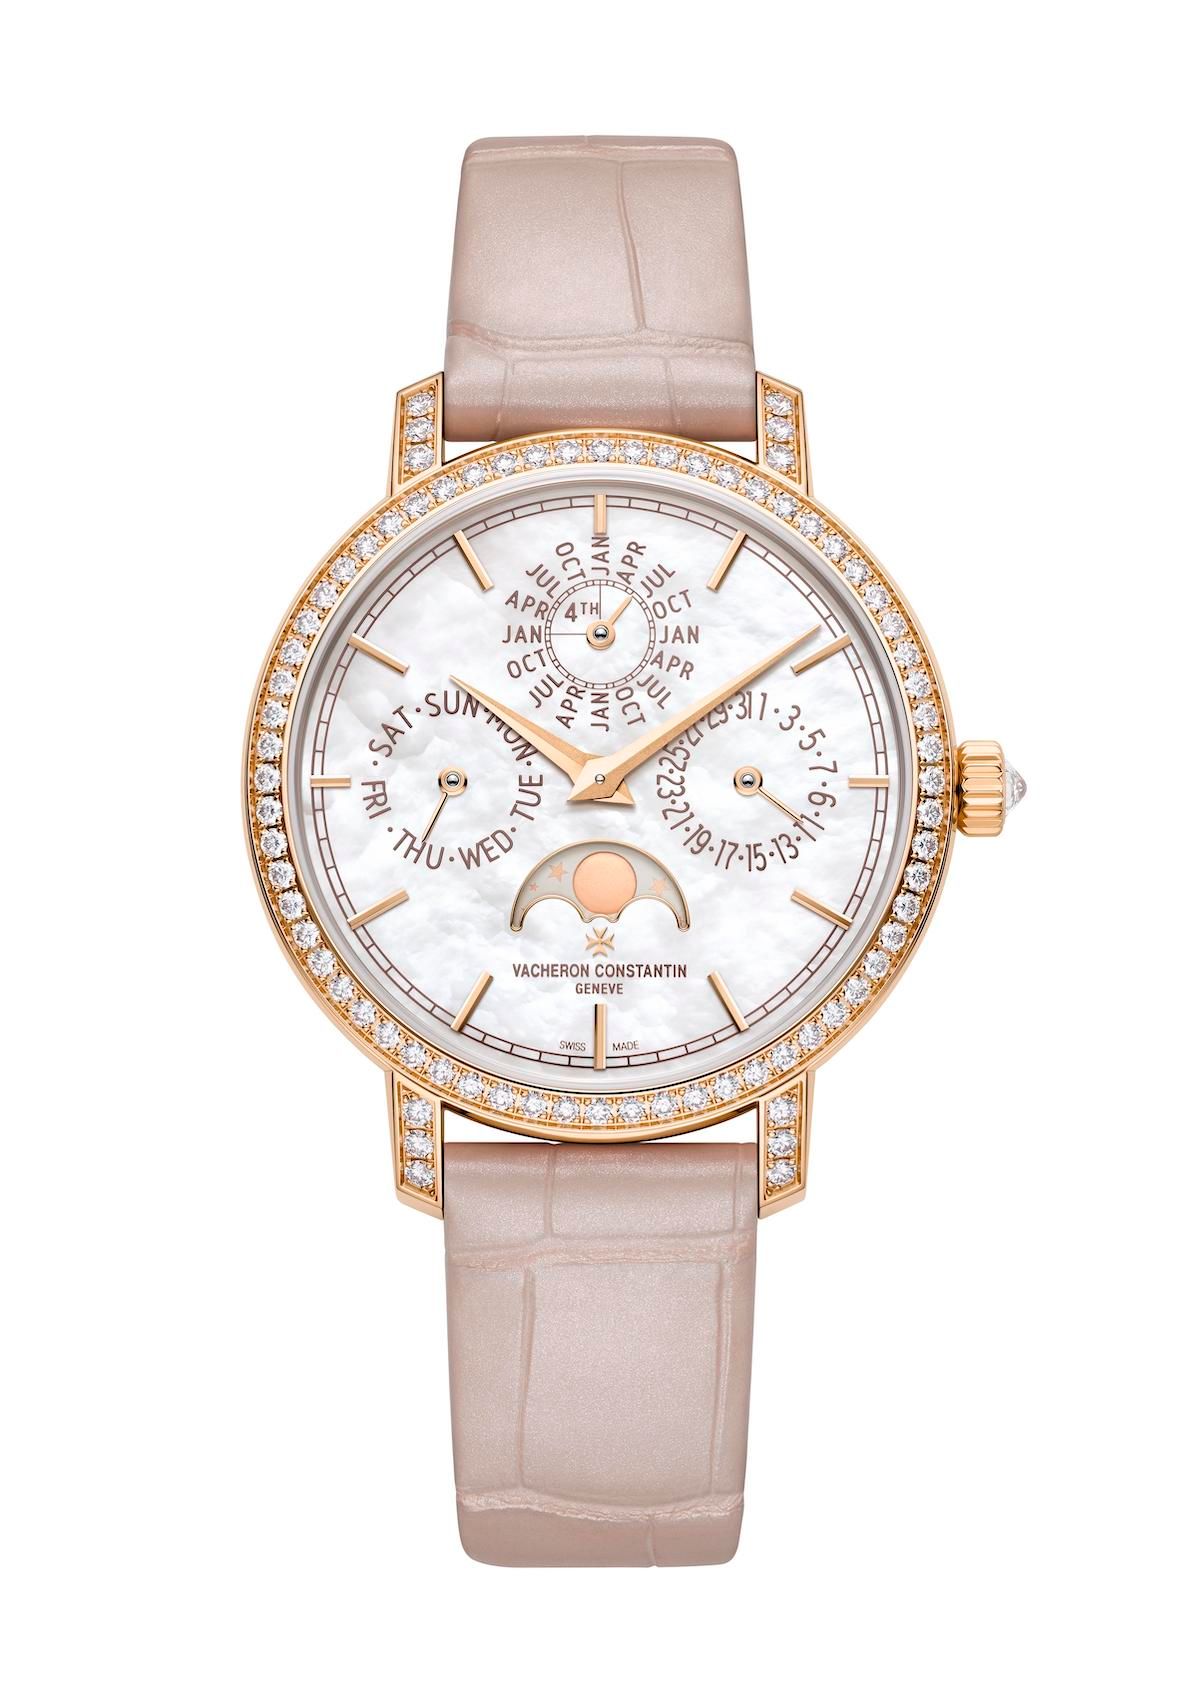 Vacheron Constantin welcomes six new ladies’ watches to its repertoire